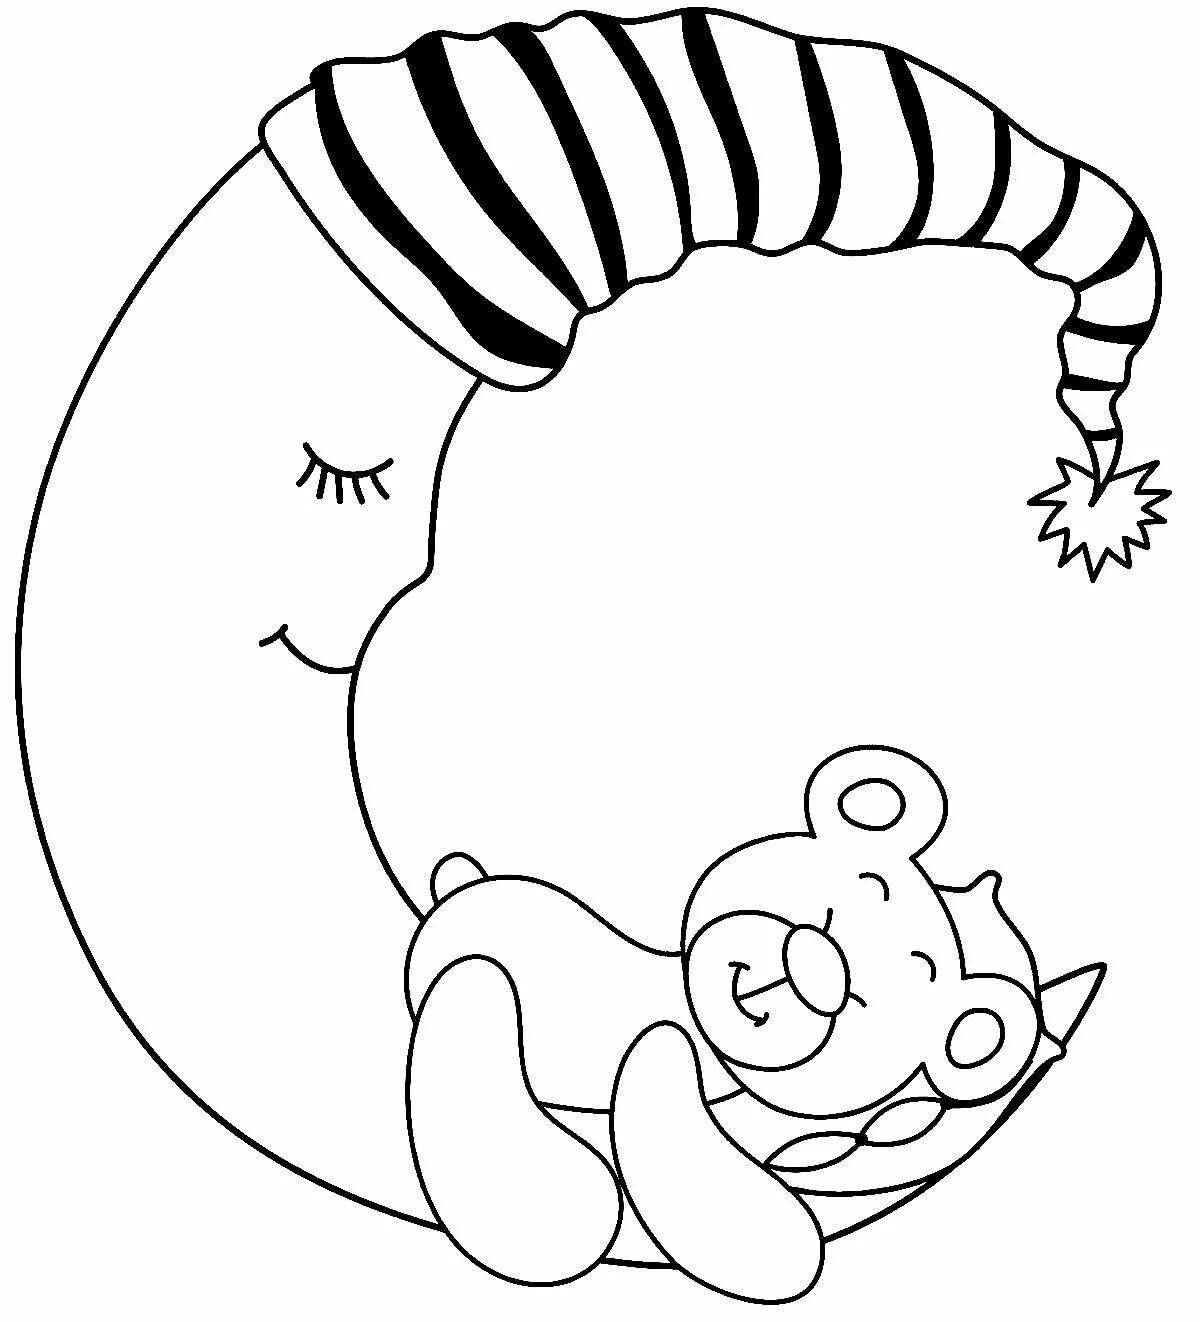 Majestic bear on the moon coloring page